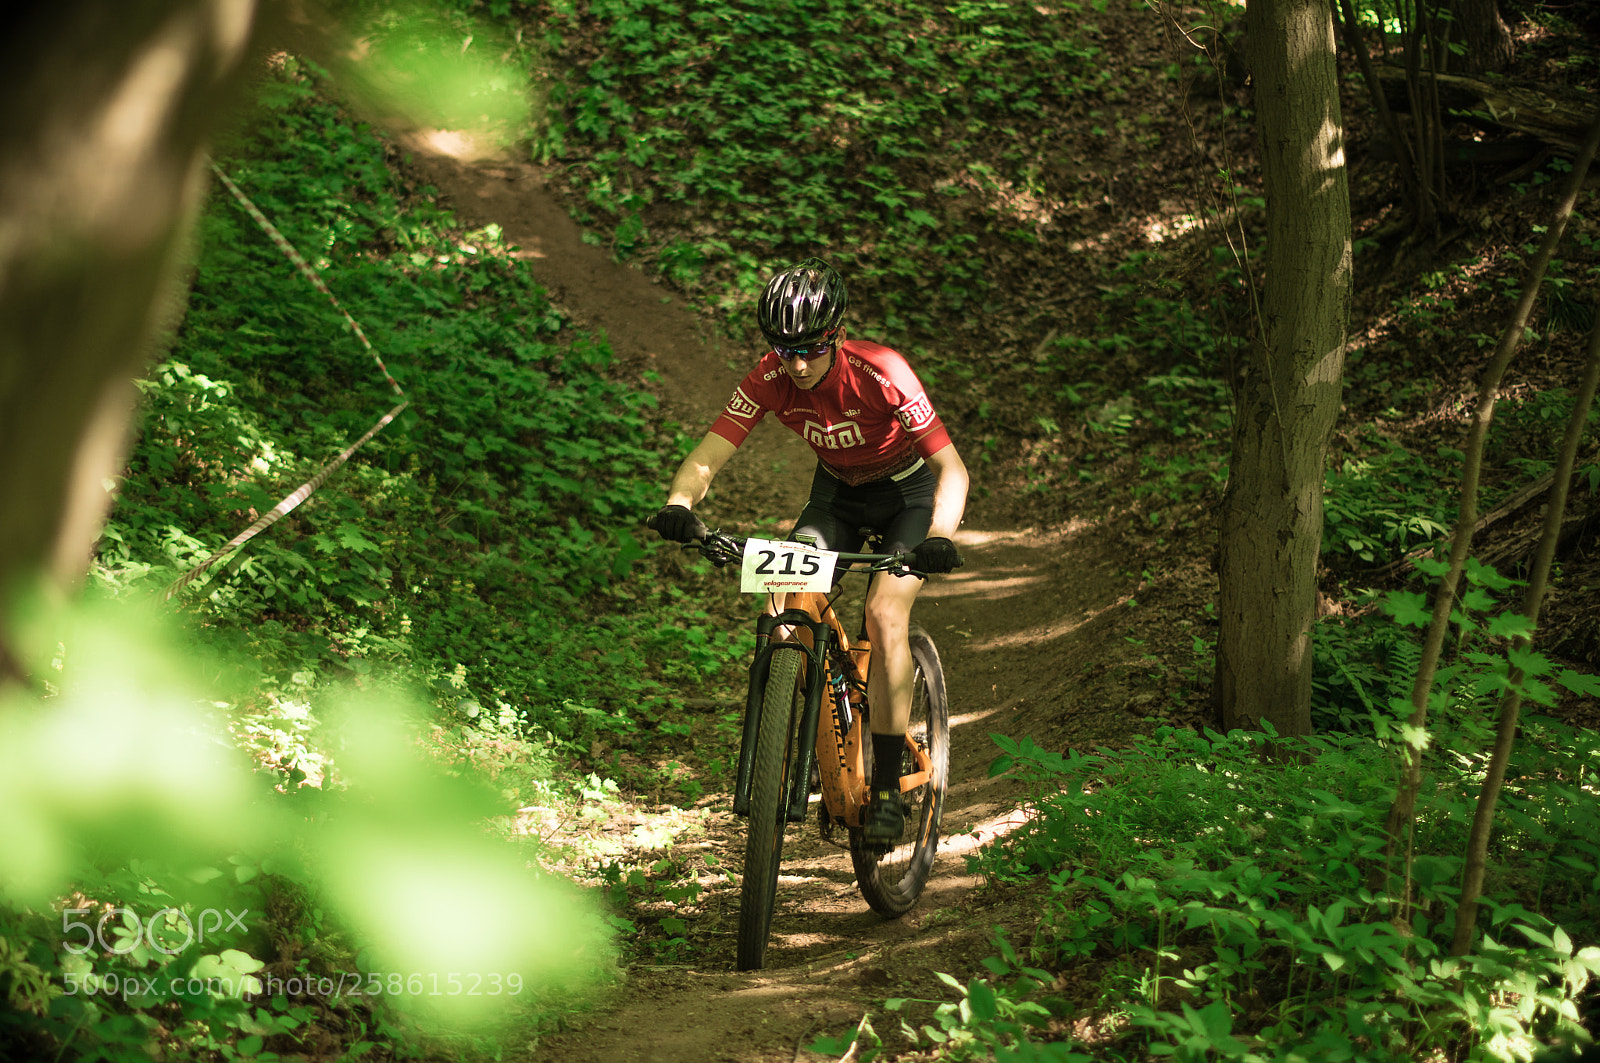 Pentax K-3 sample photo. Mtb race in forest photography